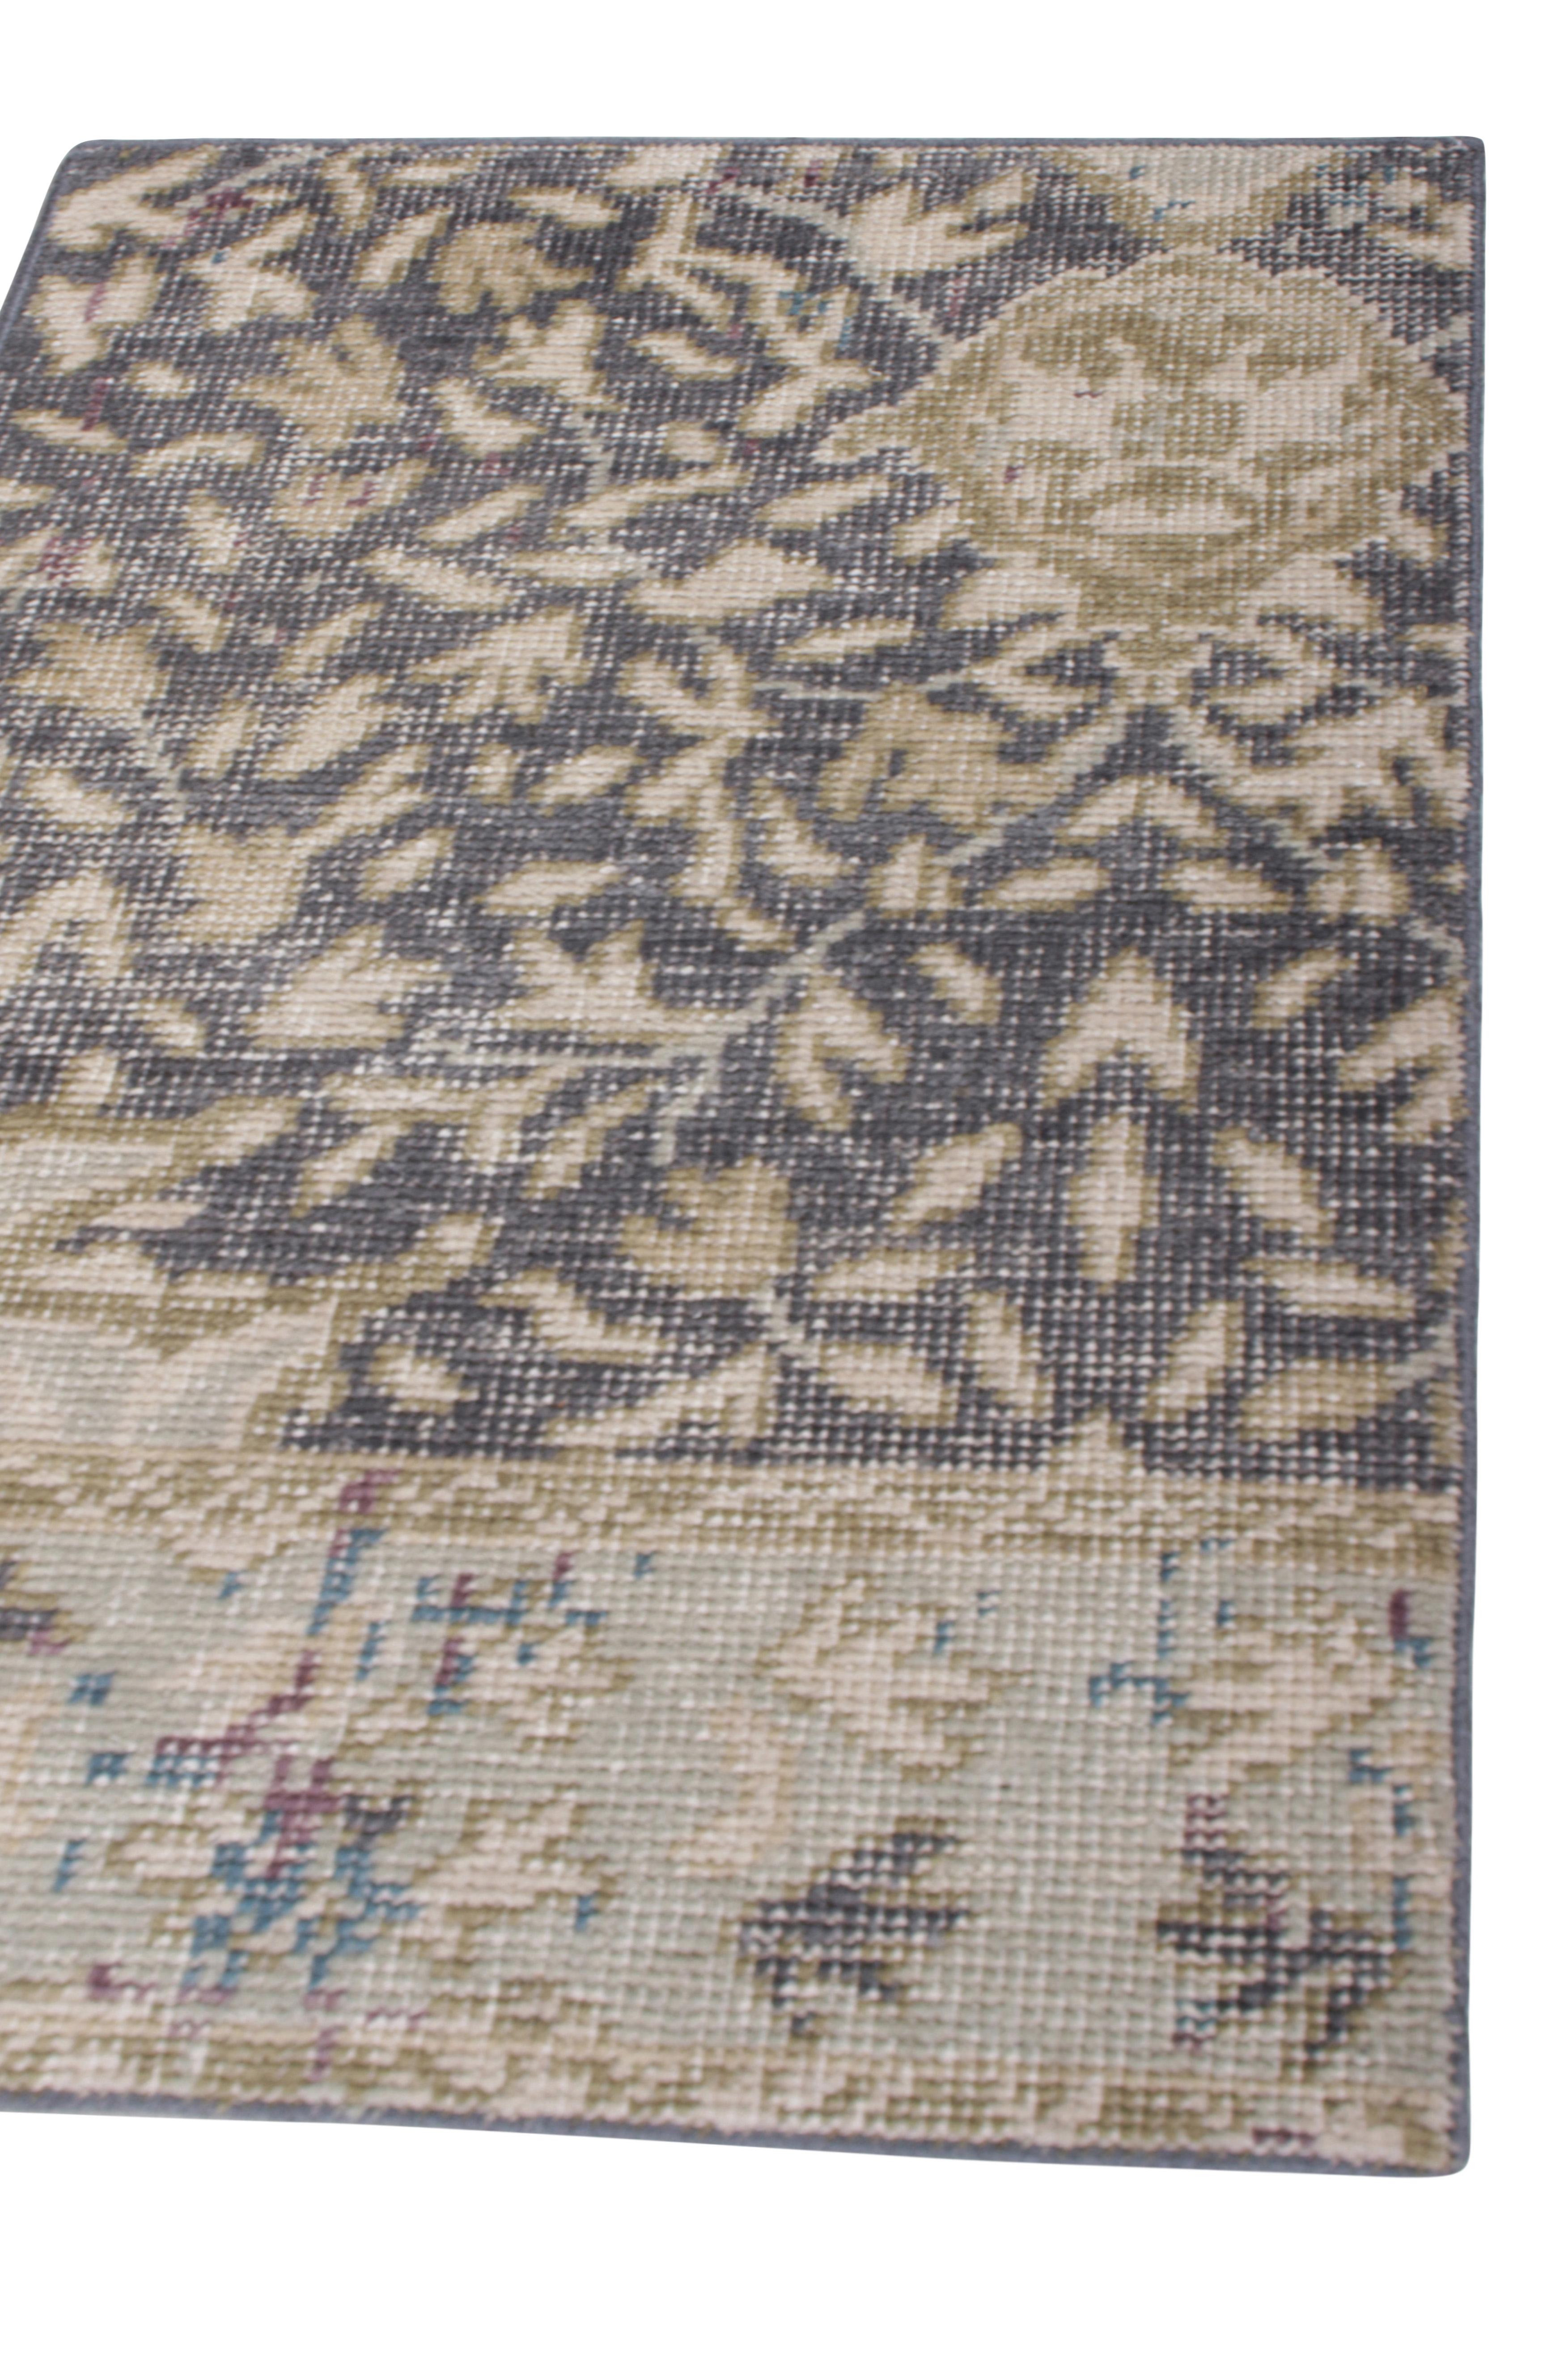 Rug & Kilim’s Distressed Style Gift-Size Rug in Blue, Beige-Brown Floral Pattern In New Condition For Sale In Long Island City, NY